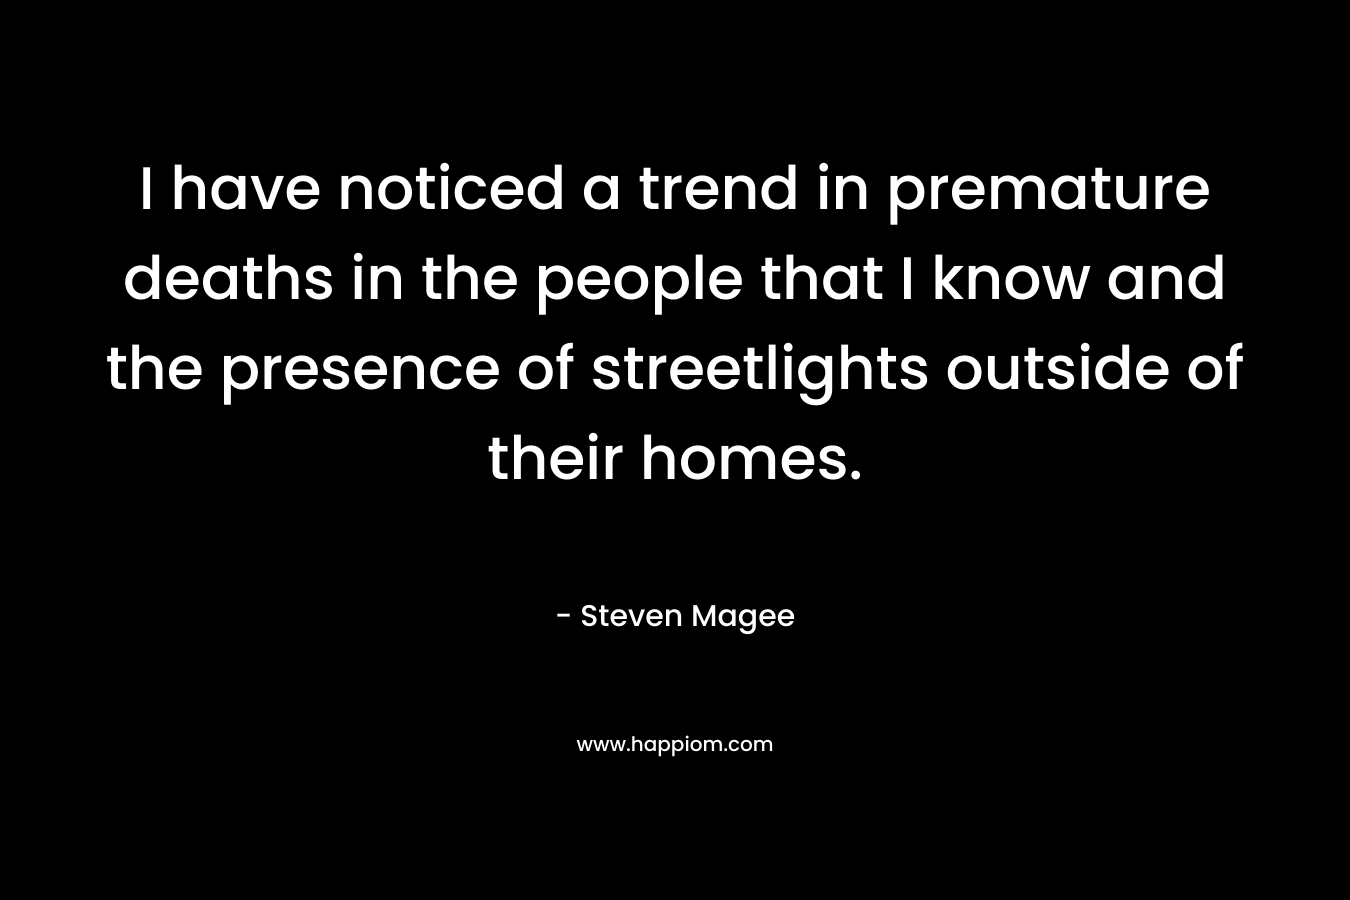 I have noticed a trend in premature deaths in the people that I know and the presence of streetlights outside of their homes. – Steven Magee